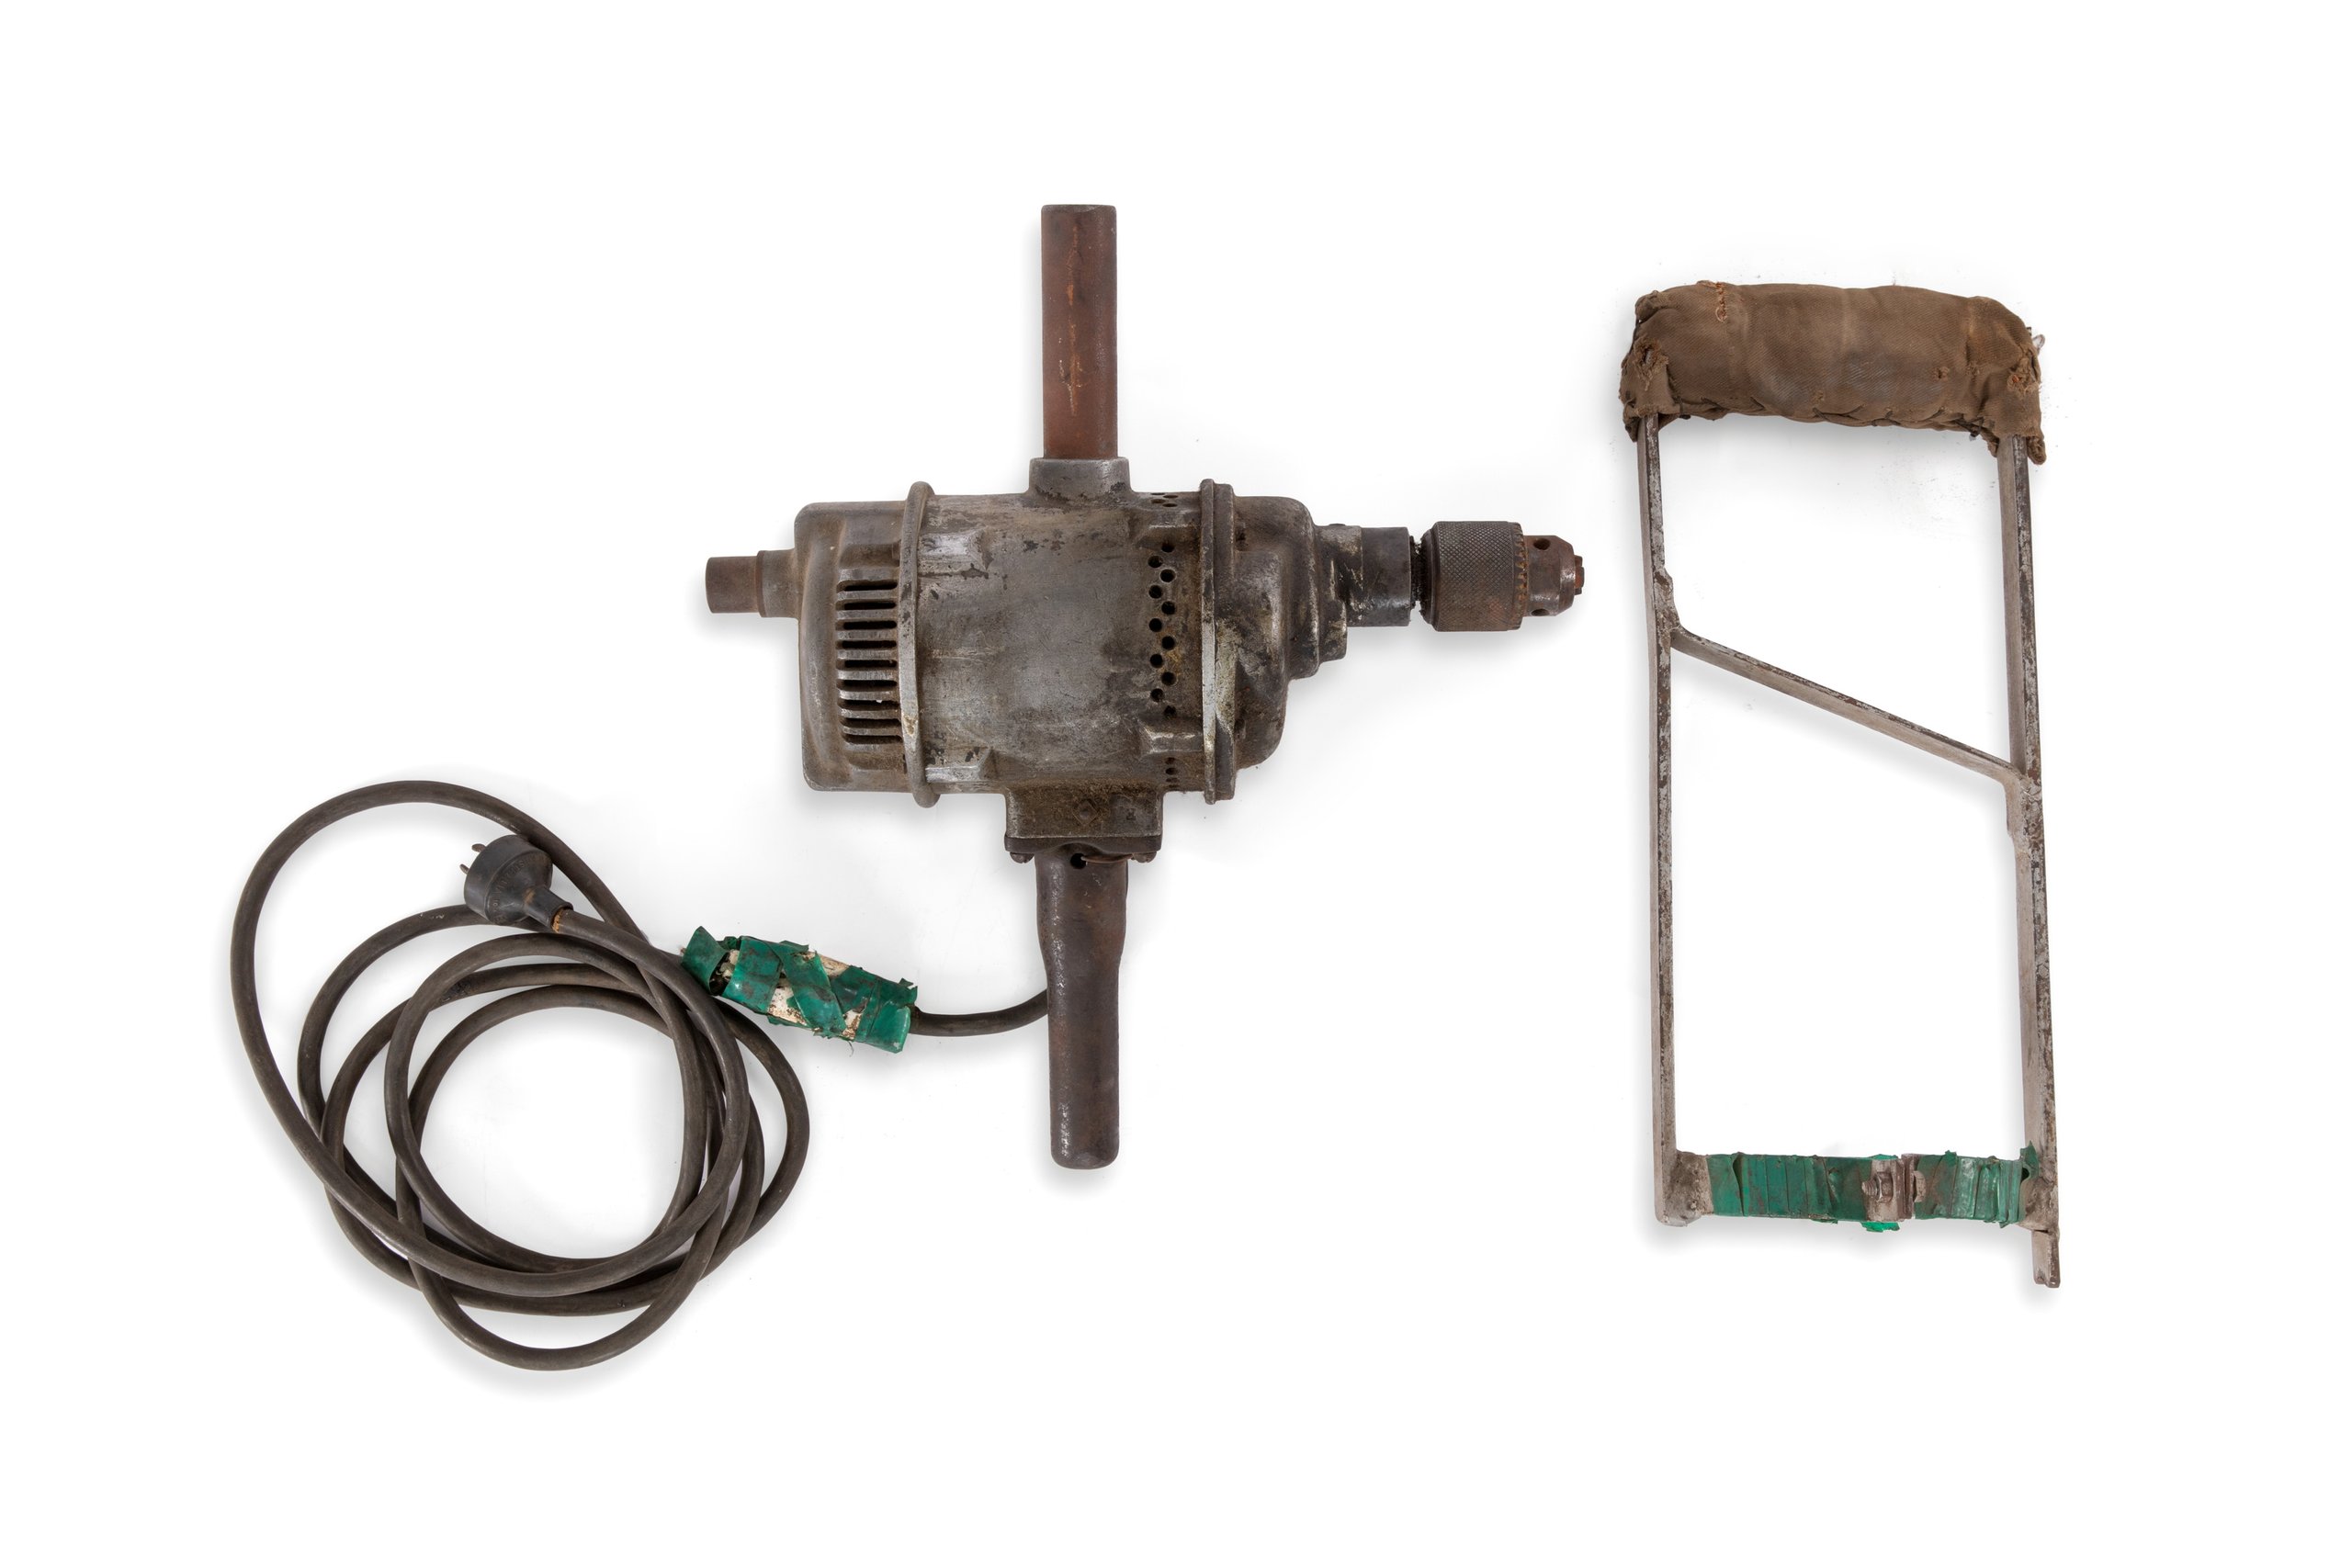 Electric drill from the early 20th century